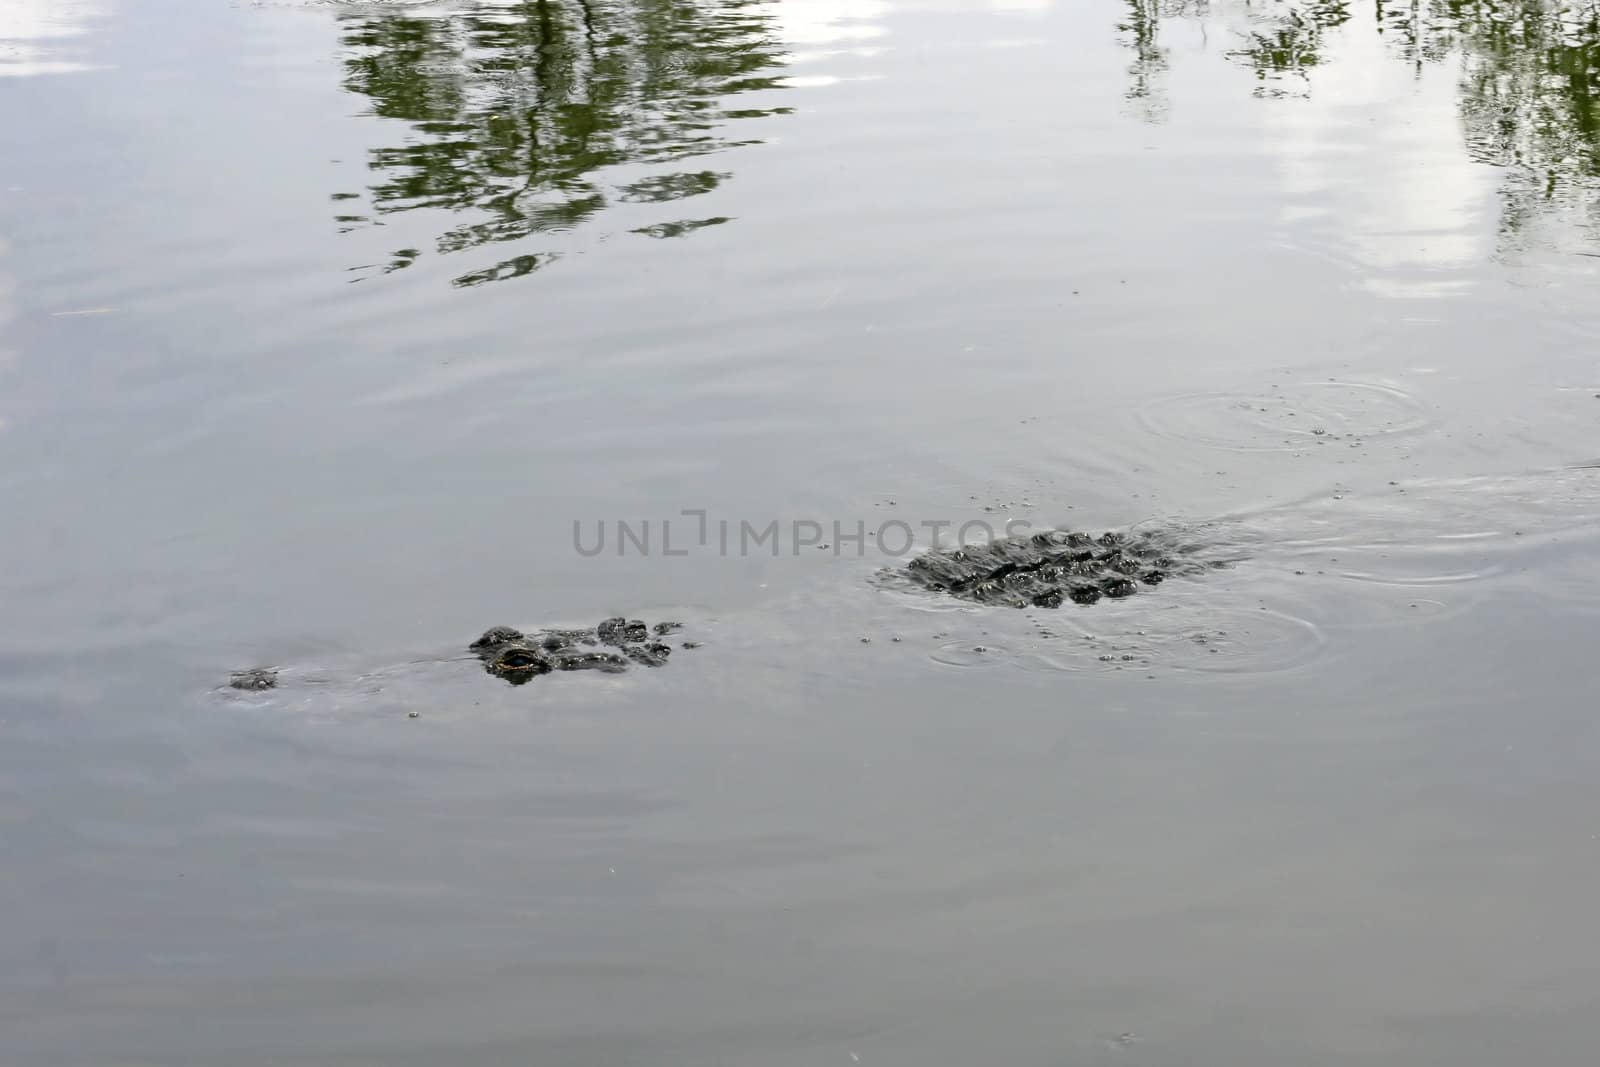 An alligator swimming in water in Florida.